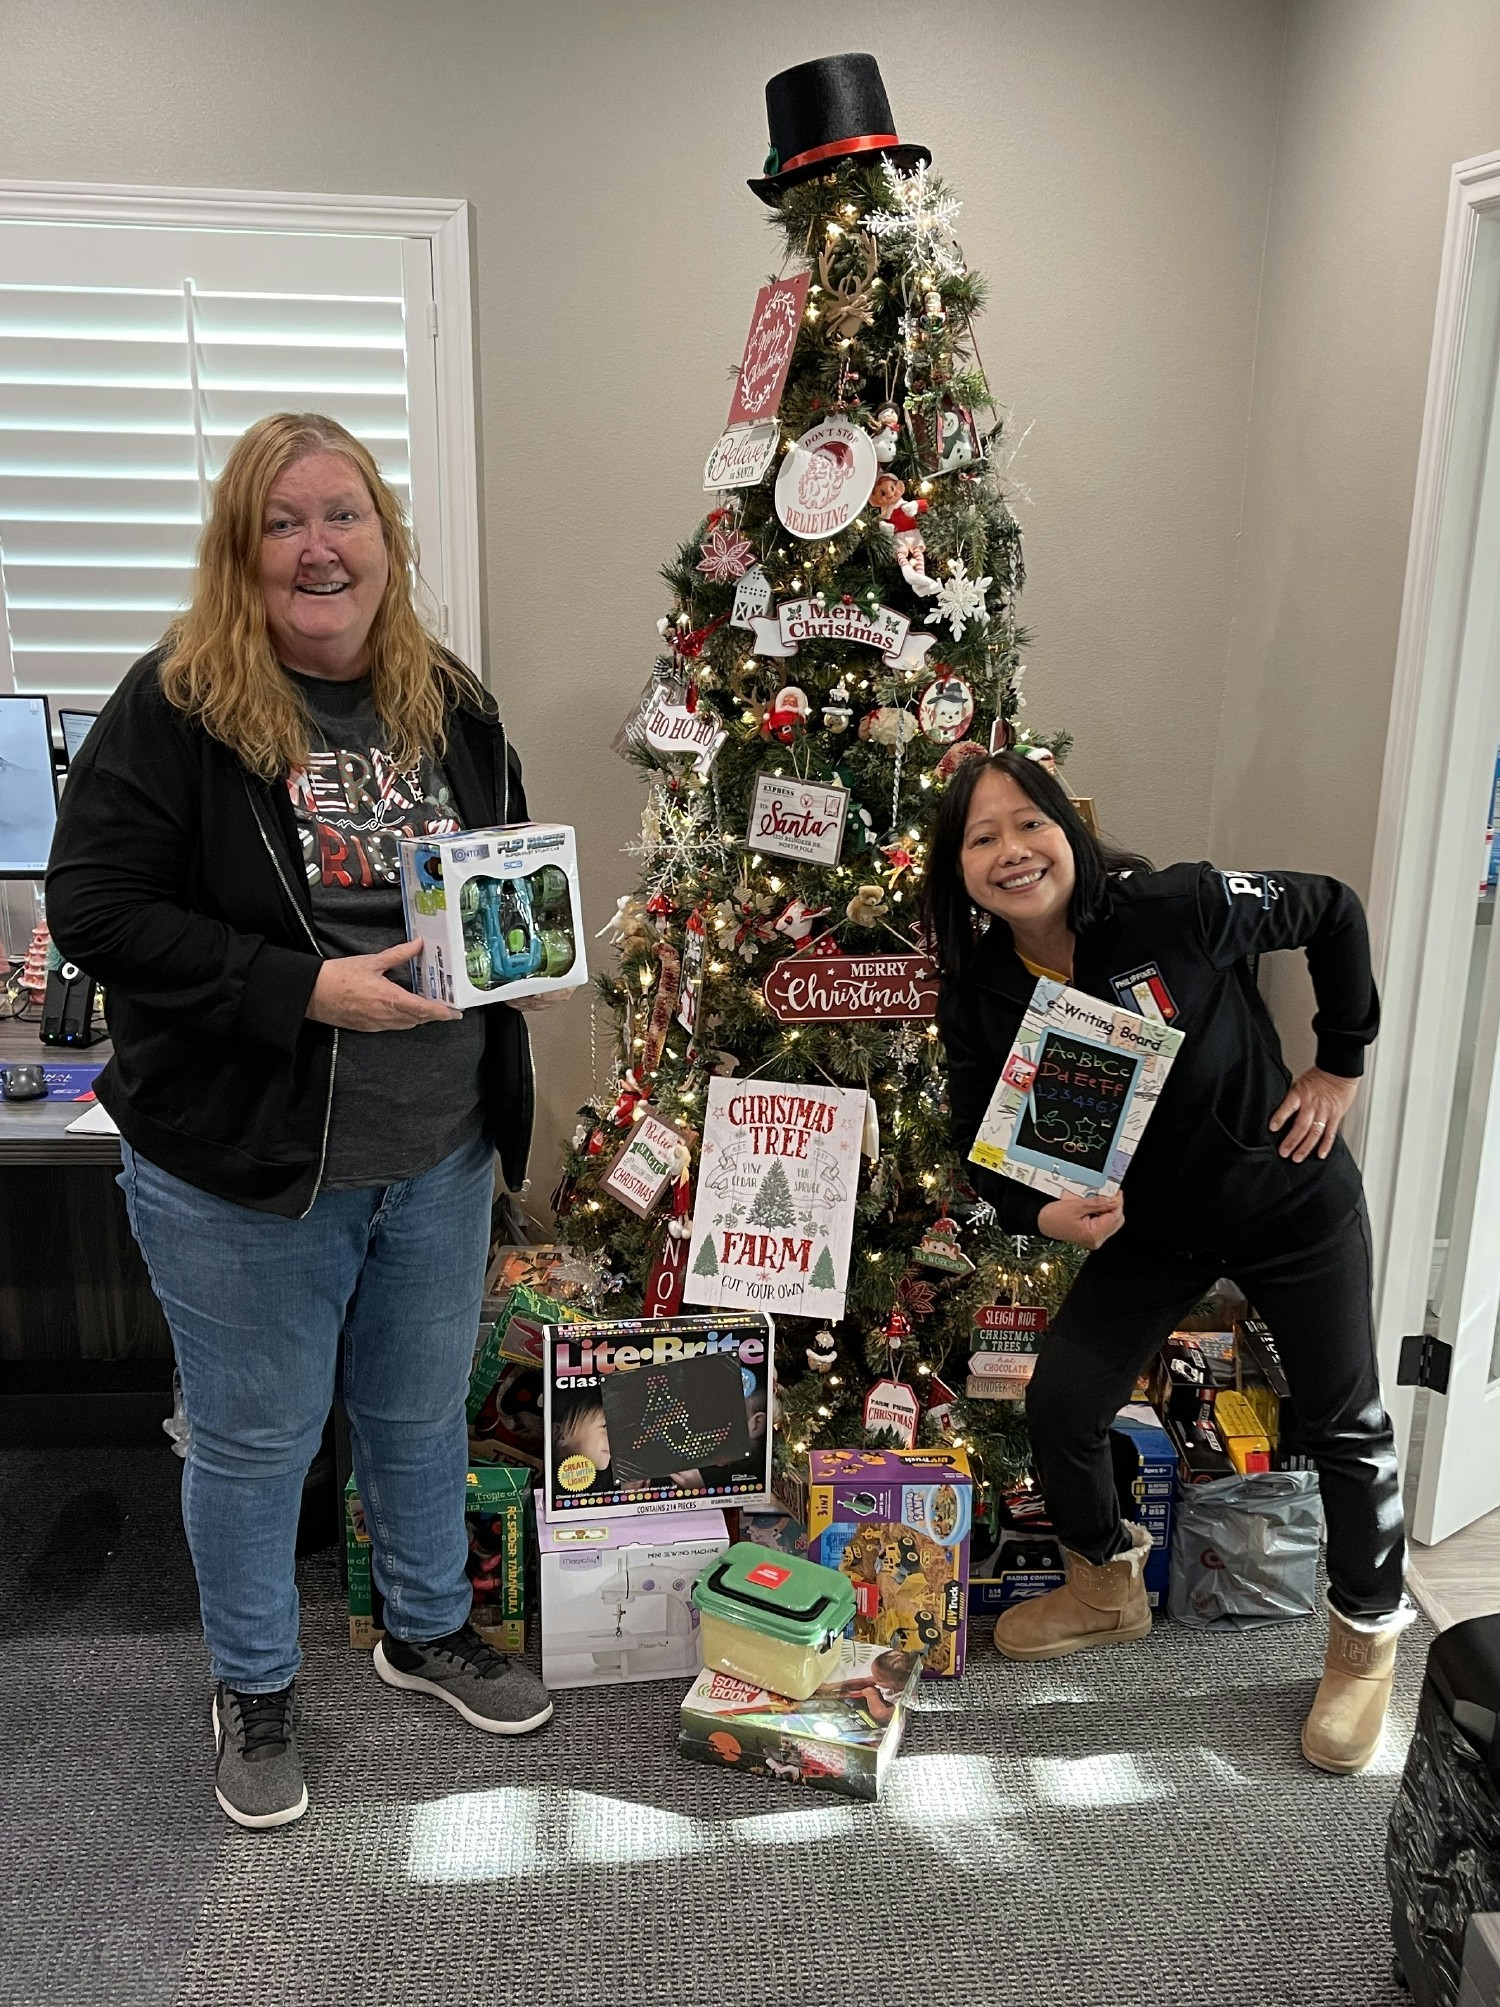 TIS team partnered with the SAFE Family Justice Centers to collect Christmas gifts for children in Riverside, CA. 